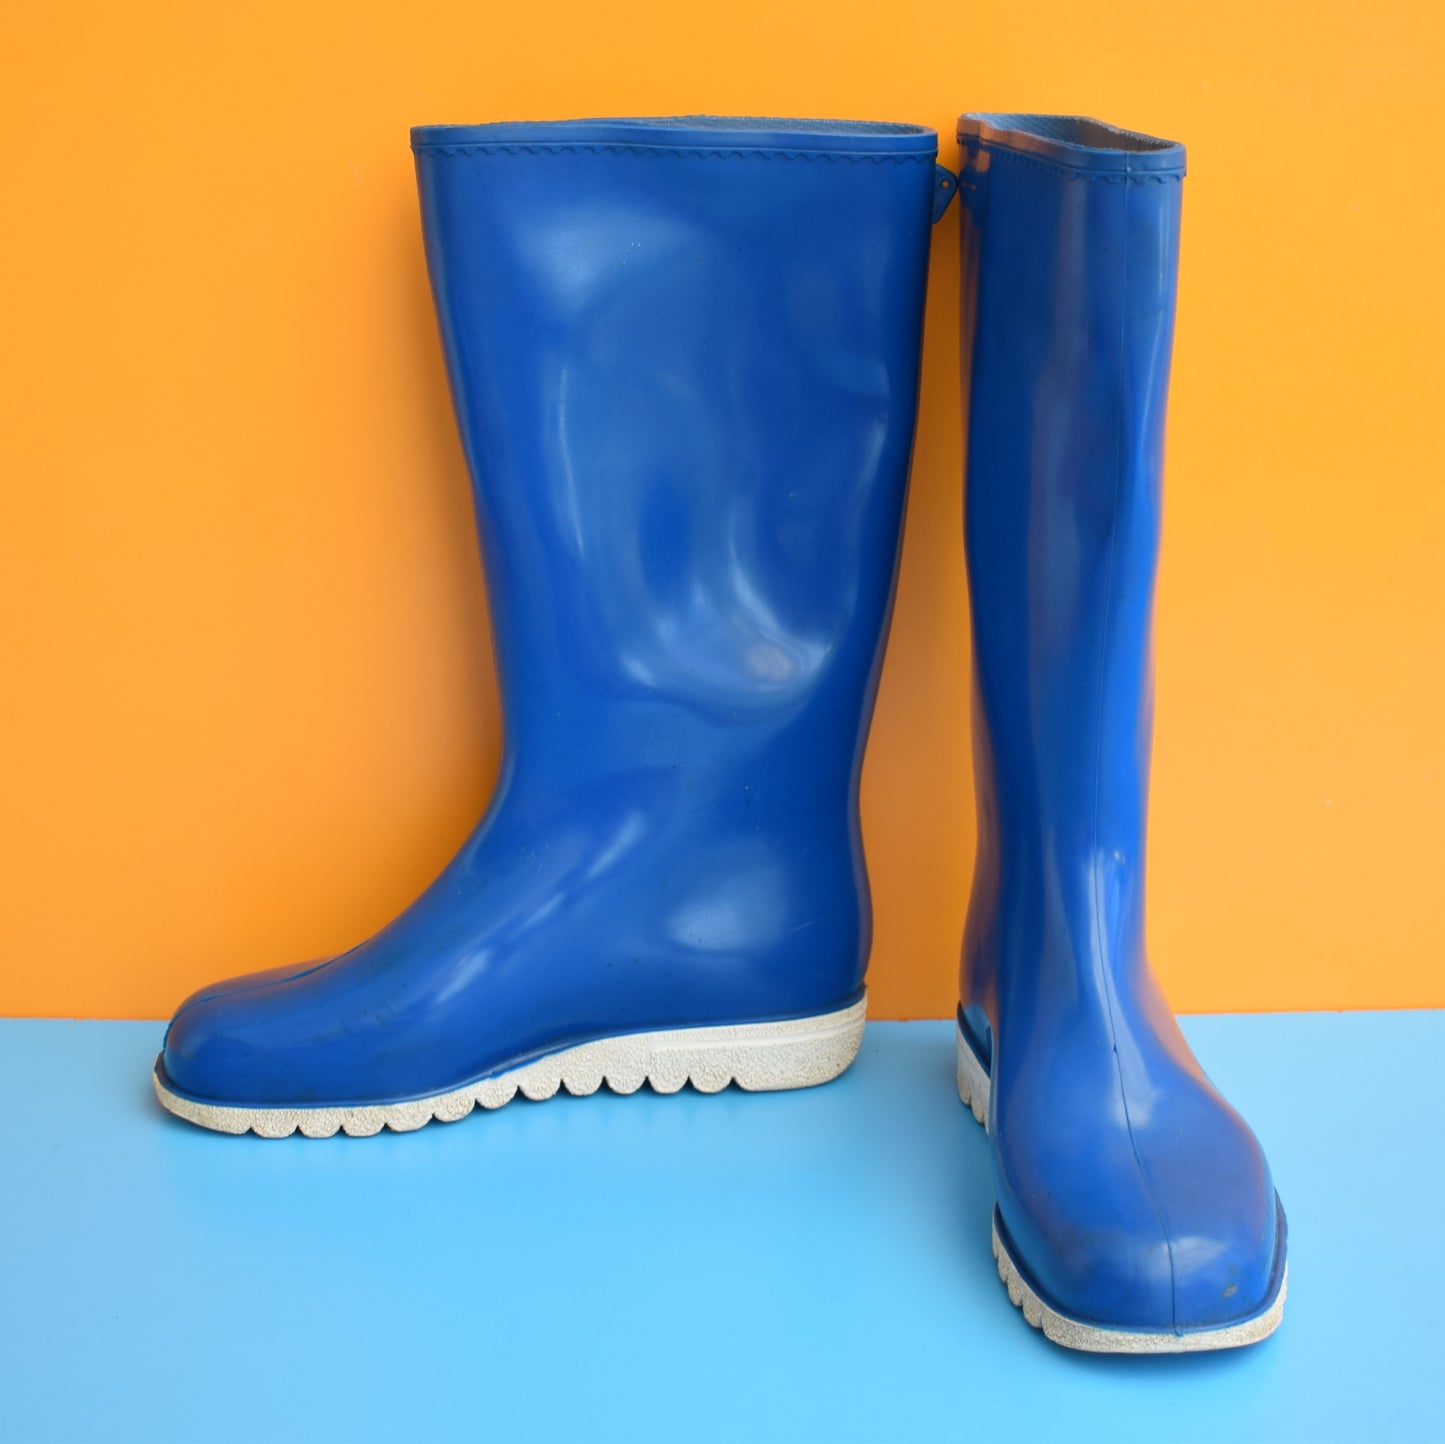 Vintage 1970s Dunlop Welly Boots - Blue 4